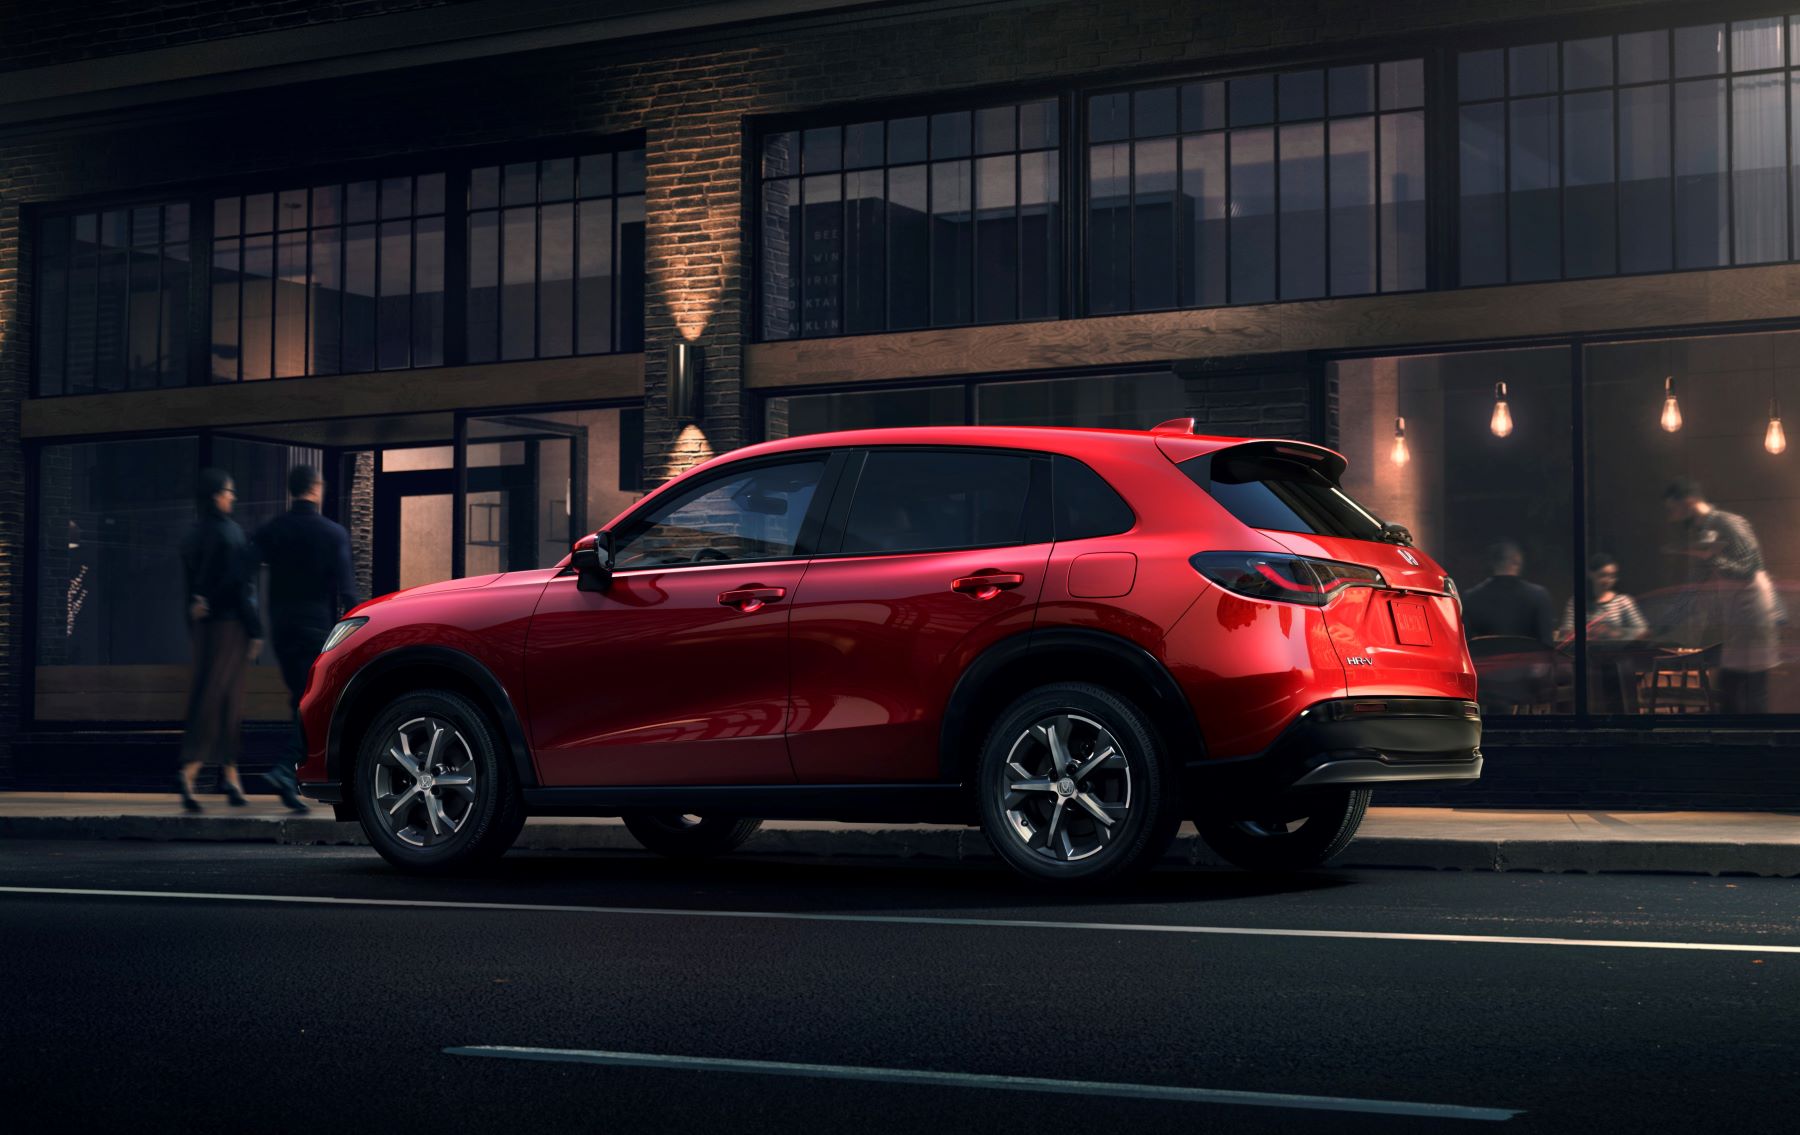 The 2023 Honda HR-V subcompact SUV in red with new athletic styling